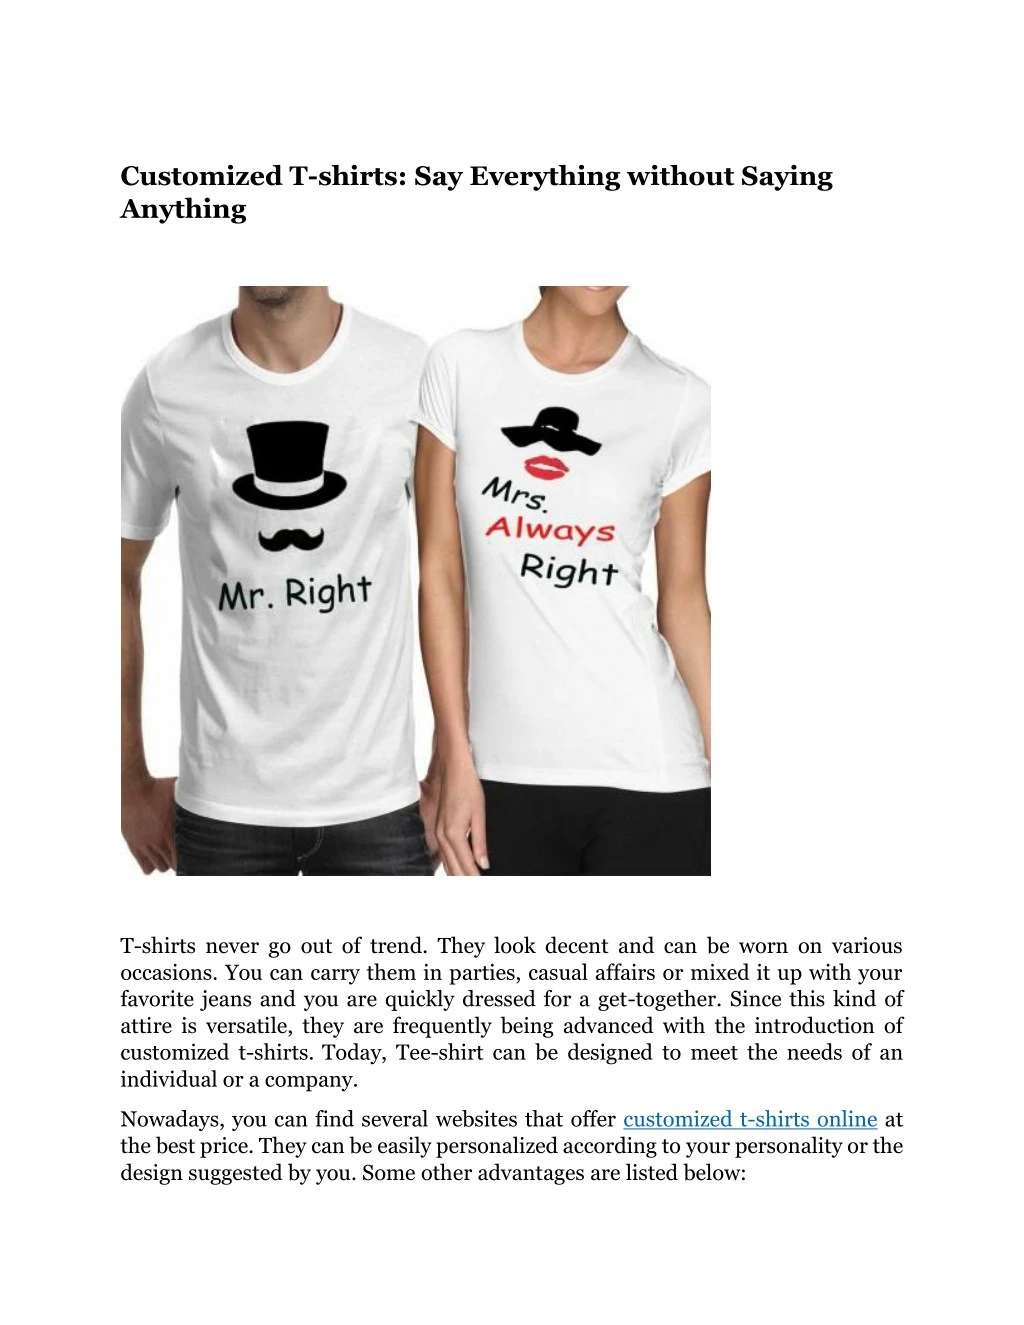 customized t shirts say everything without saying